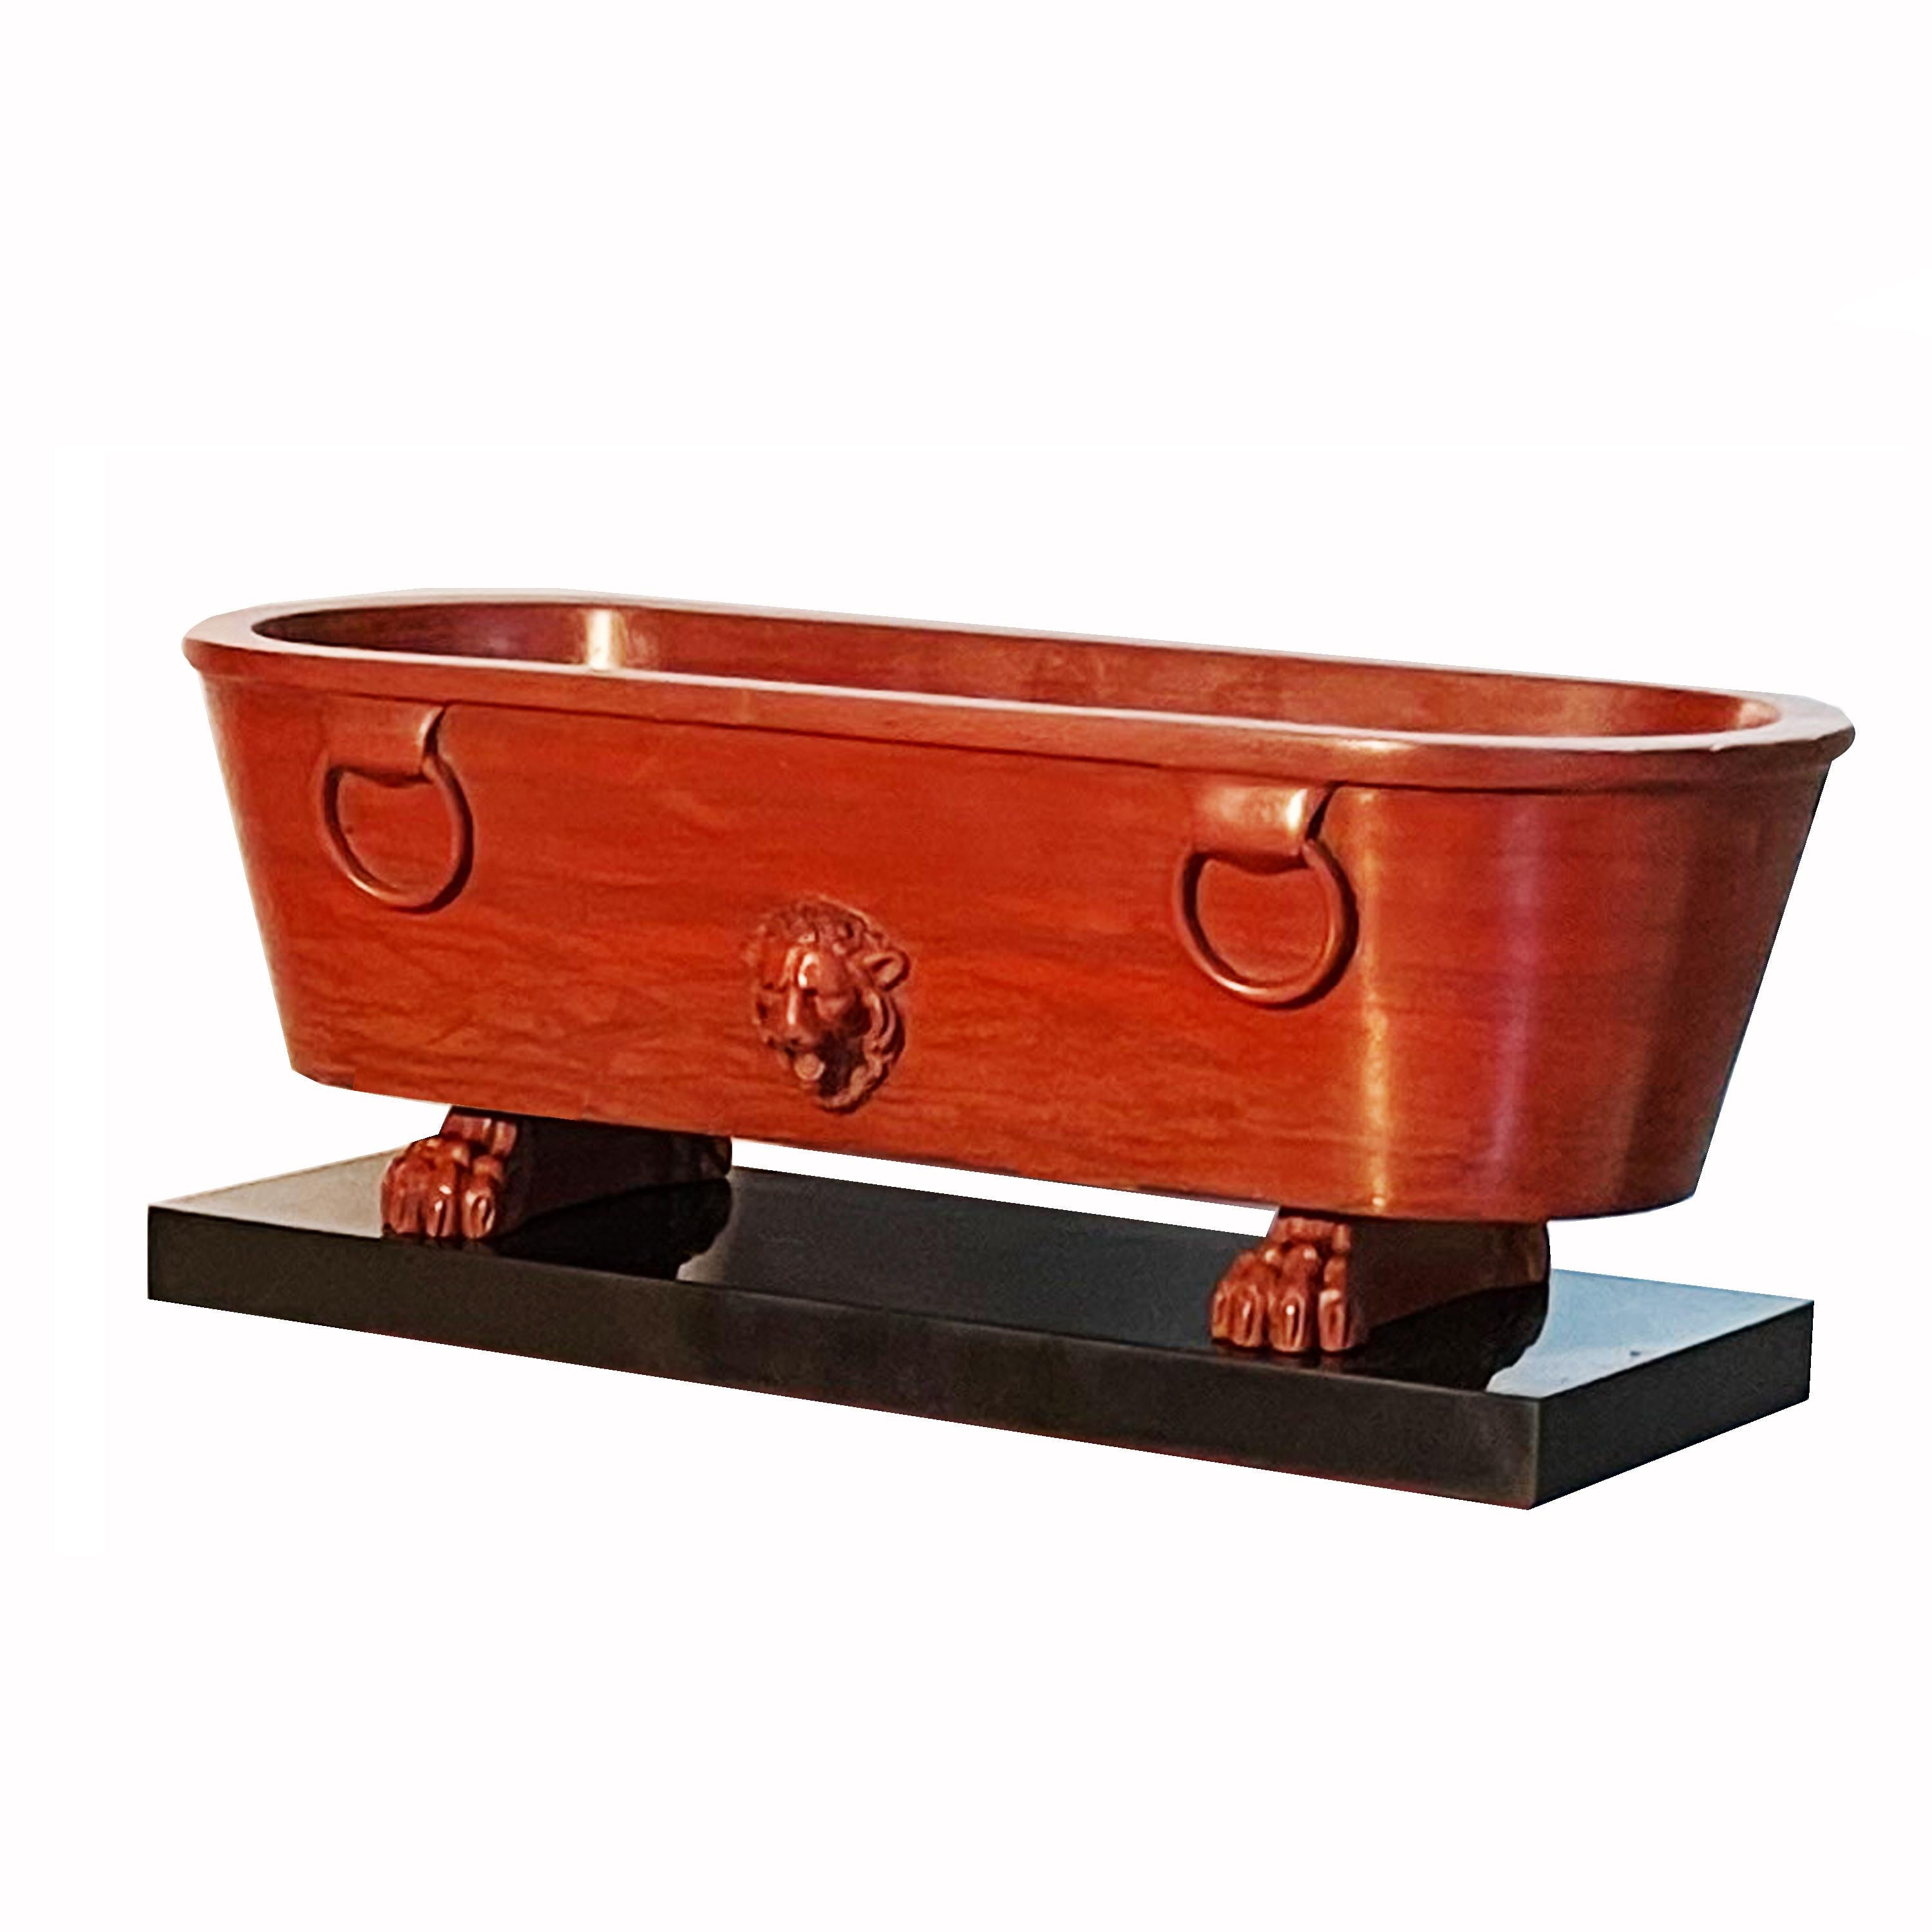 This incredible basin was inspired by the twin fountains of Piazza Farnese, in Rome ( Roman basins of Egyptian granite ) 
It was made by excavating a block of ancient Rosso antico marble. Rosso antico was widely used throughout the Roman empire